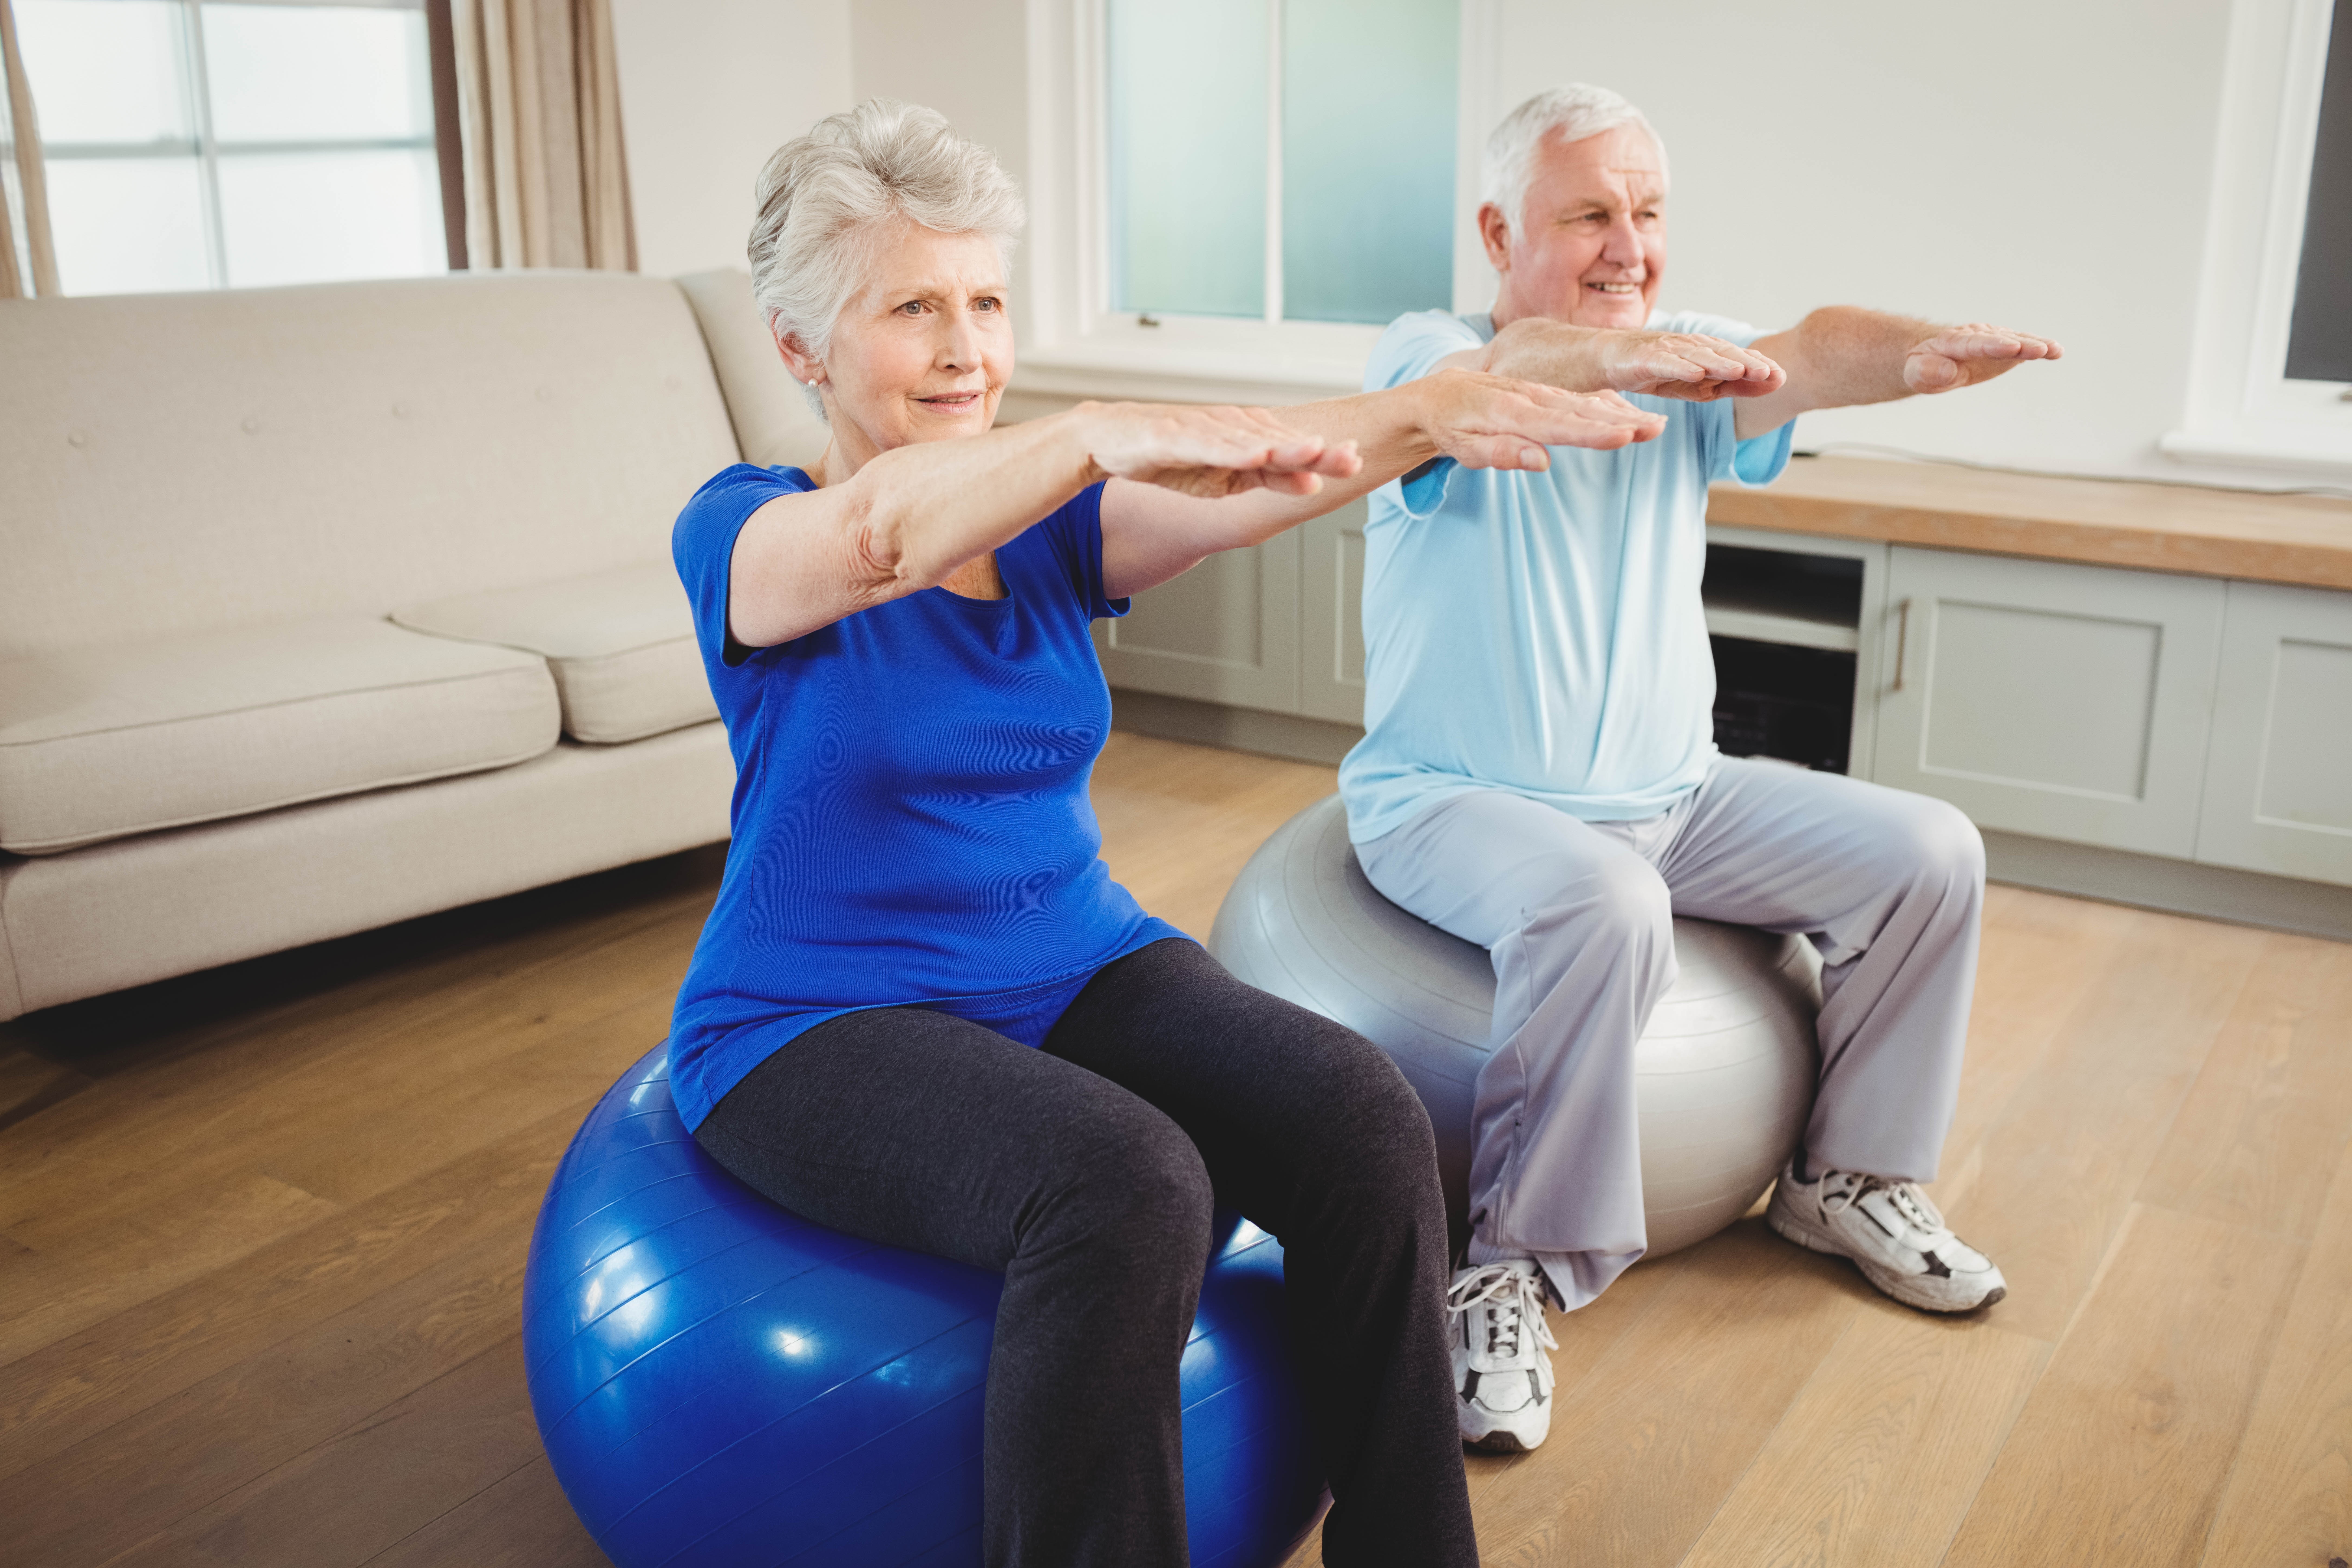 Does Exercise Help With Arthritis Pain?